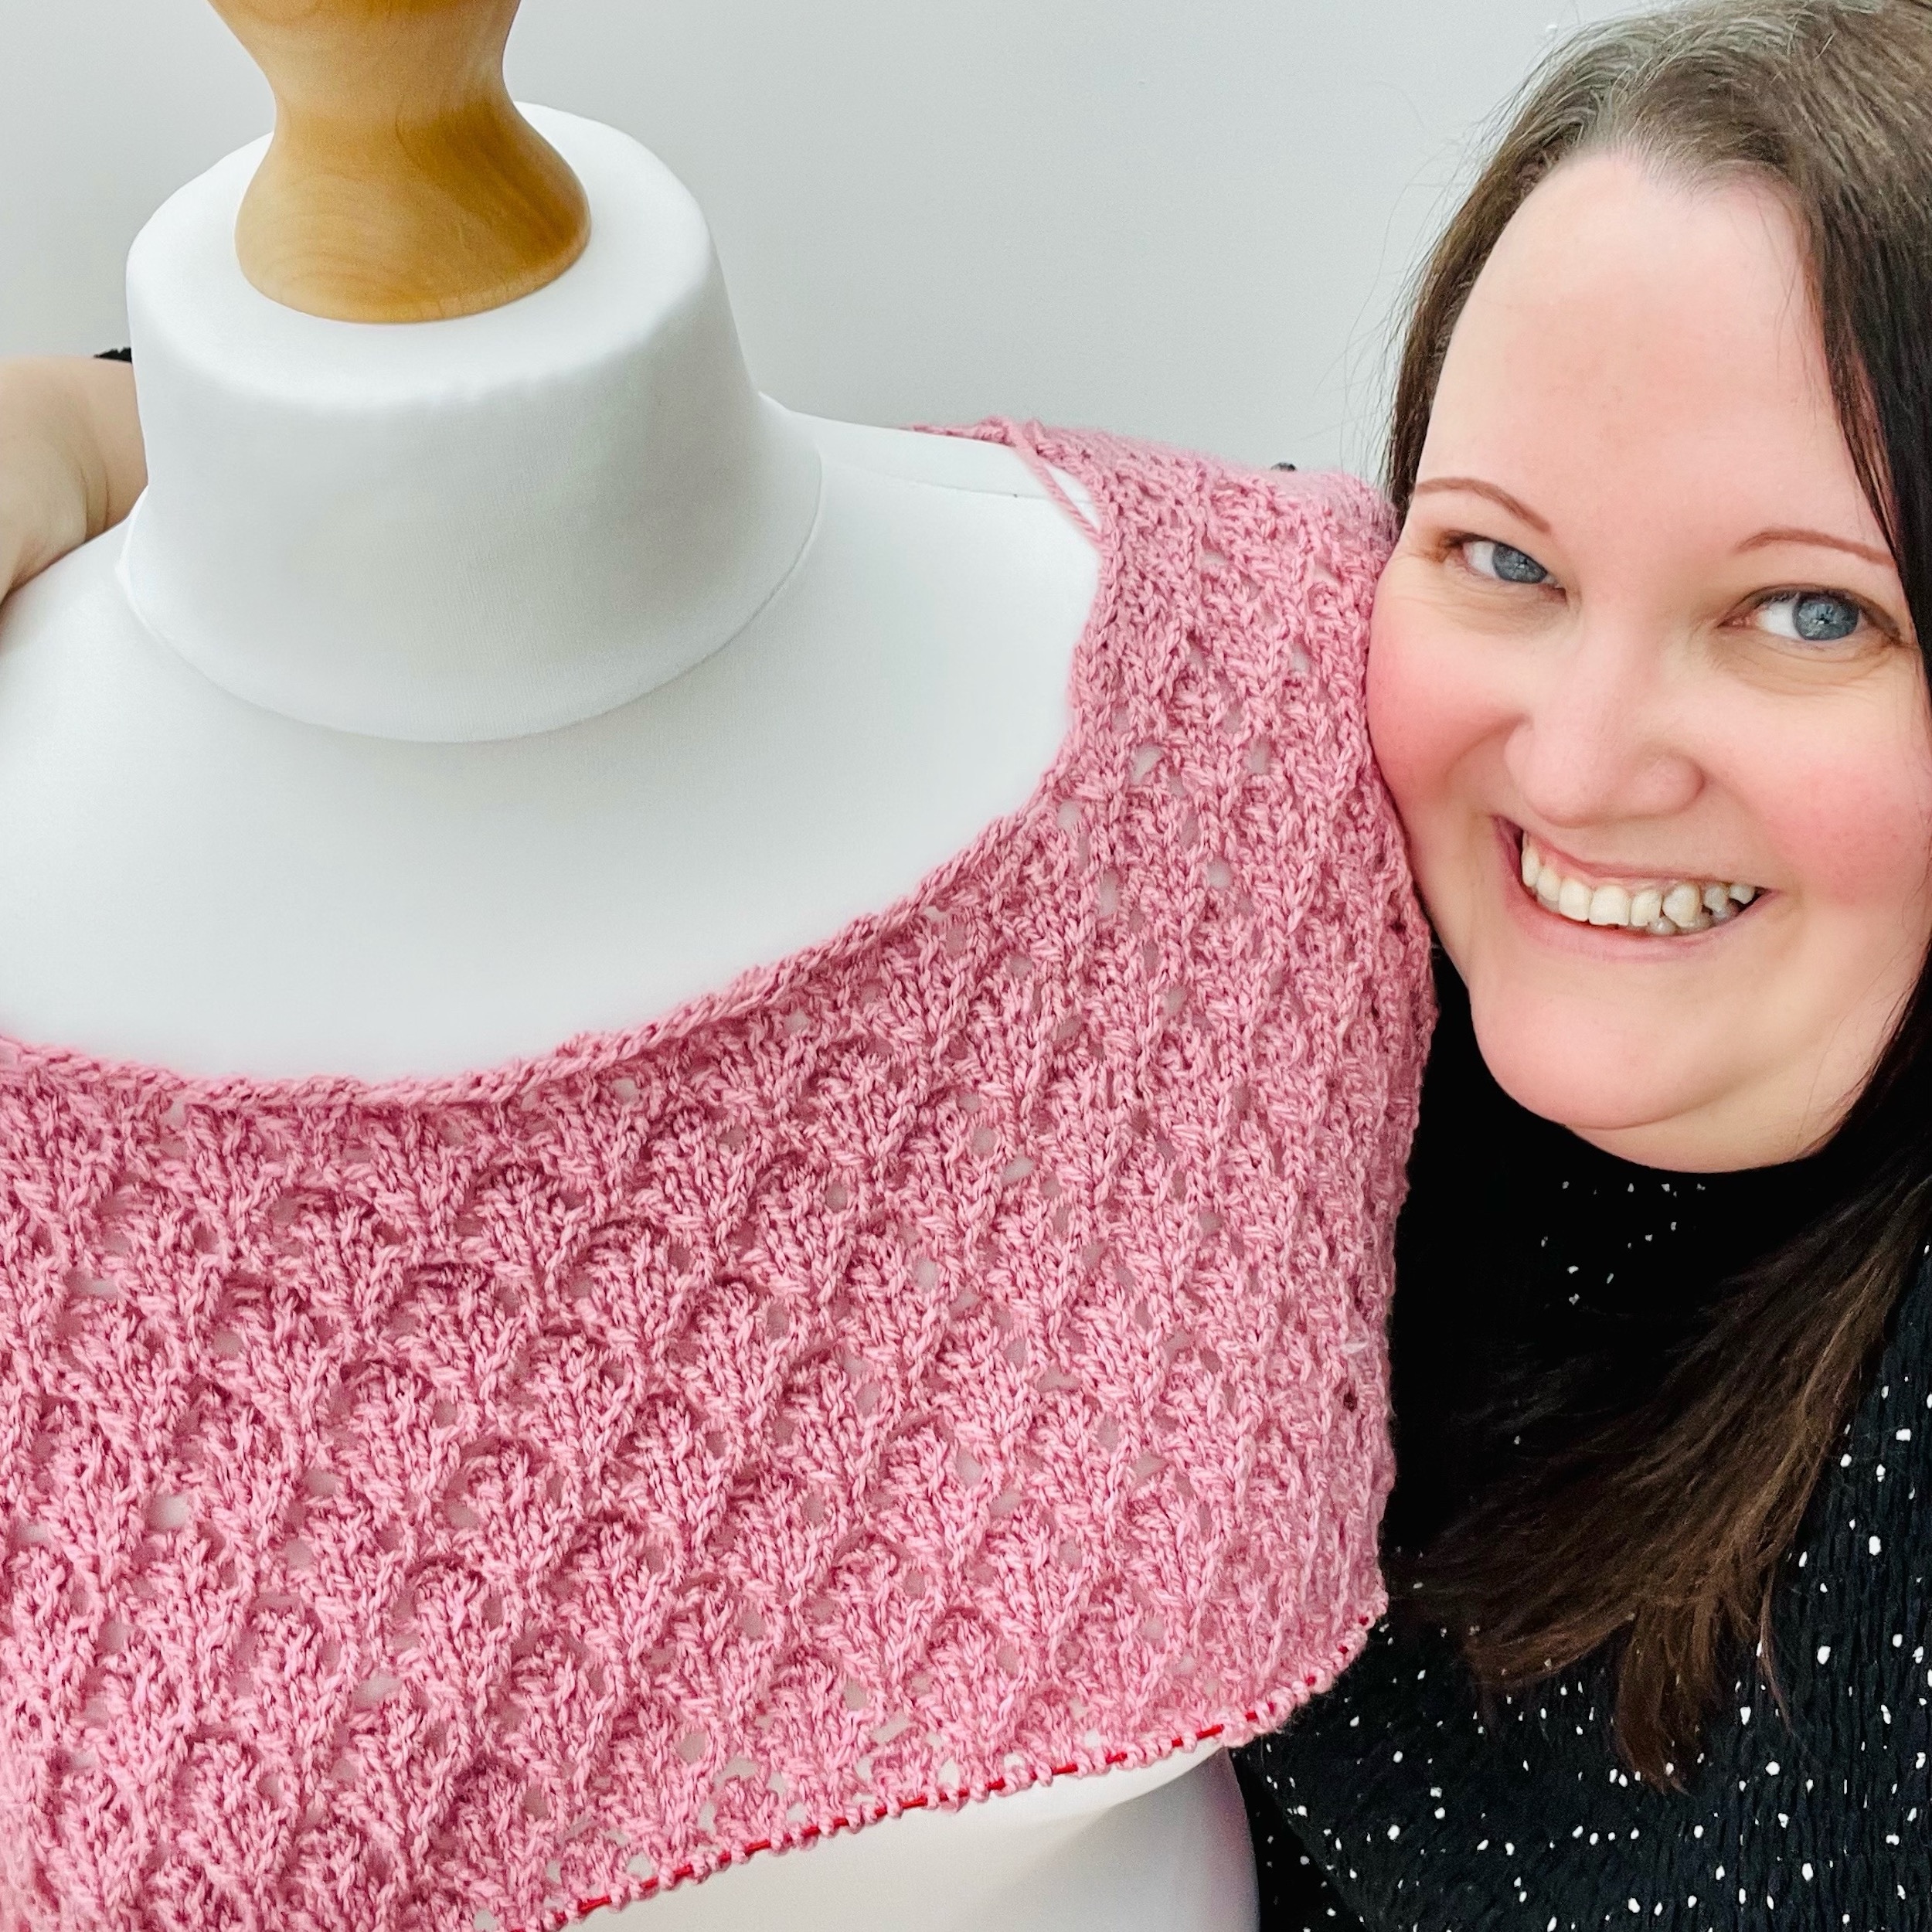 Designing for Fat Bodies - Victoria Marchant Knits